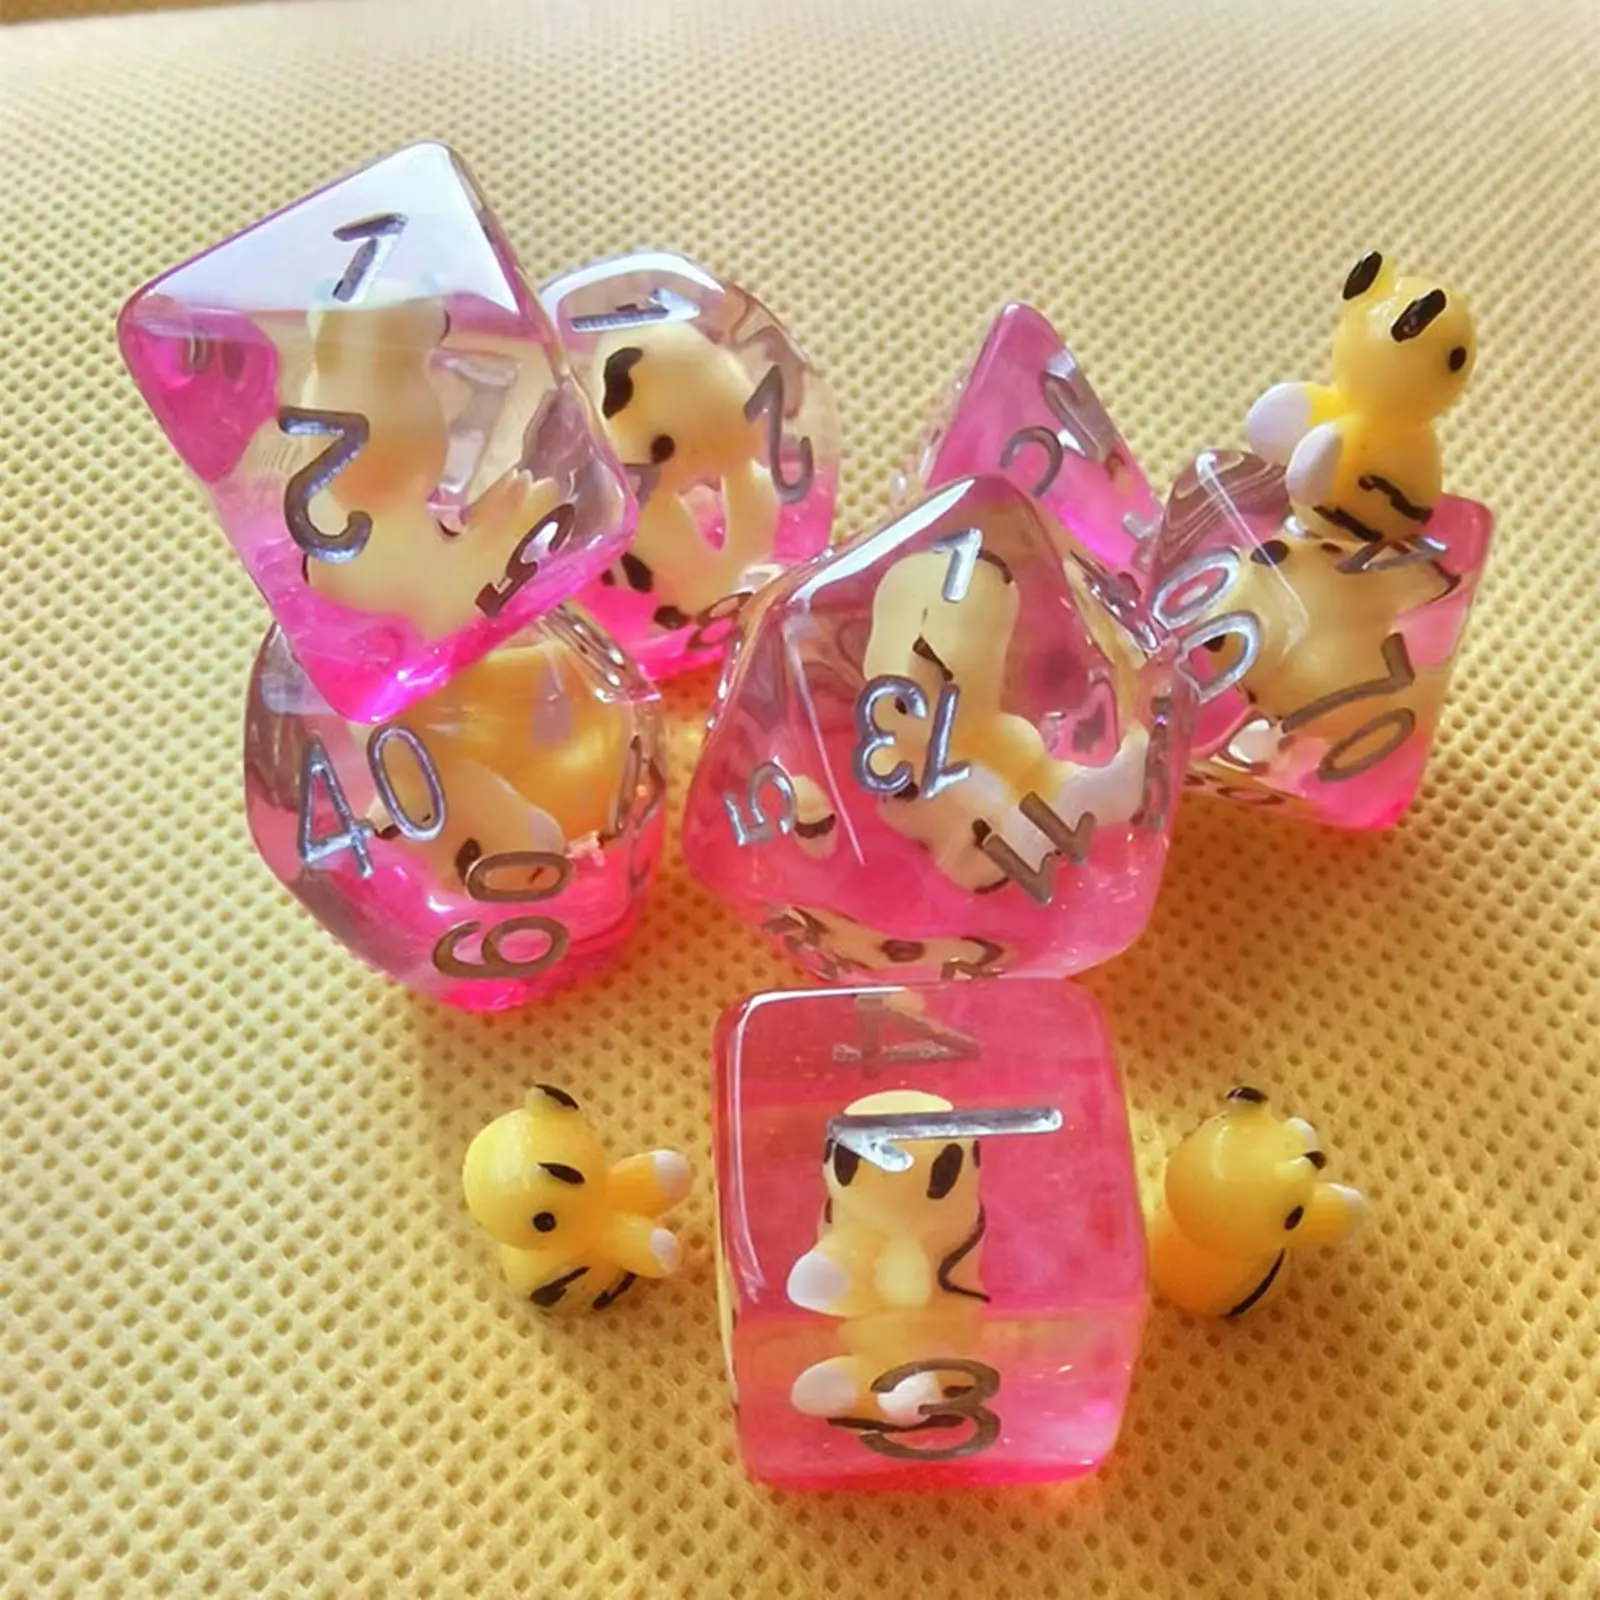 7 Pieces Resin Polyhedral dices Set Filled with Honeybee Rounded Corners Toys for Role Playing Games Table Games Party Supplies